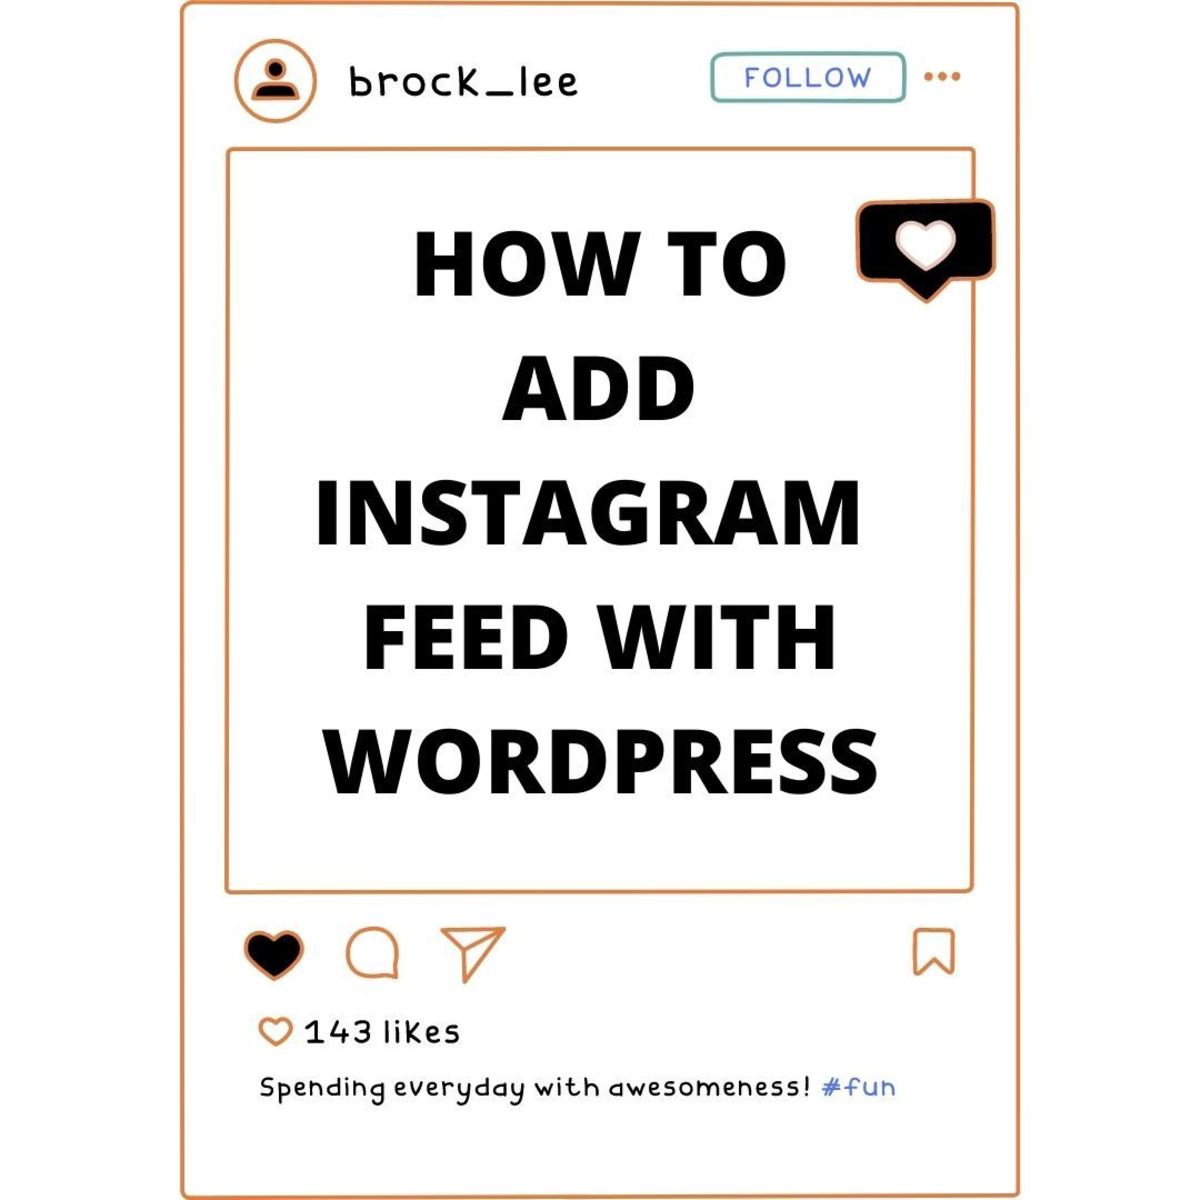 How to Add Instagram Feed on Your Wordpress Website - a Step-by-Step Guide